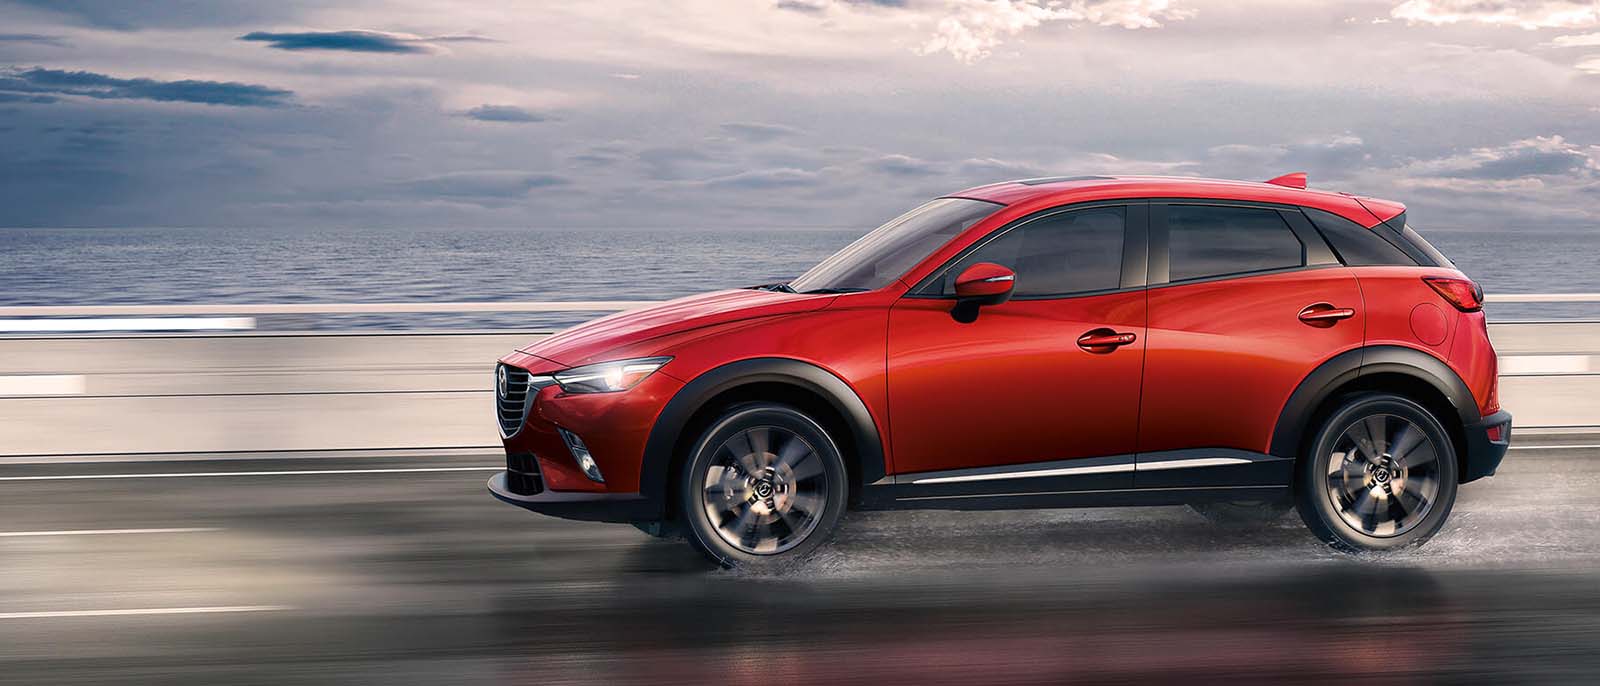 2017 Mazda CX-3 SUV Model Info | Price, MPG, Features, Photos & More